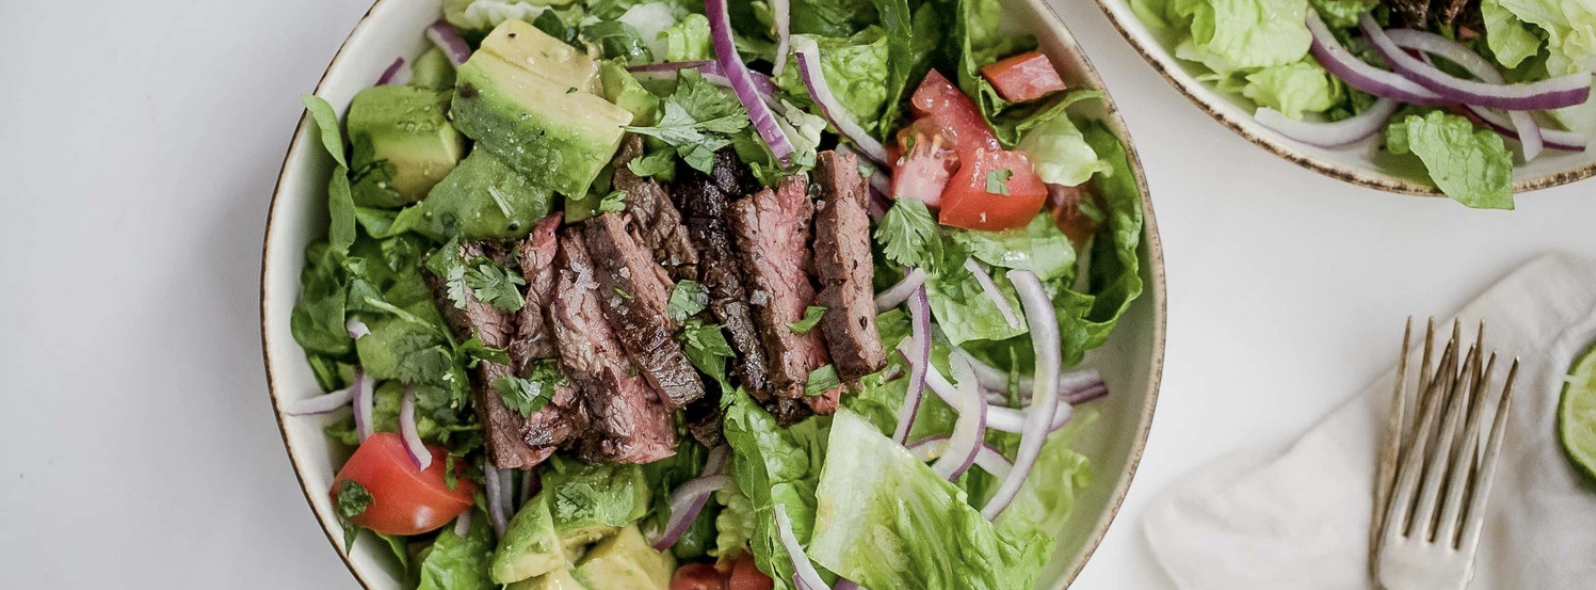 avocado and steak salad with red onions and tomatos